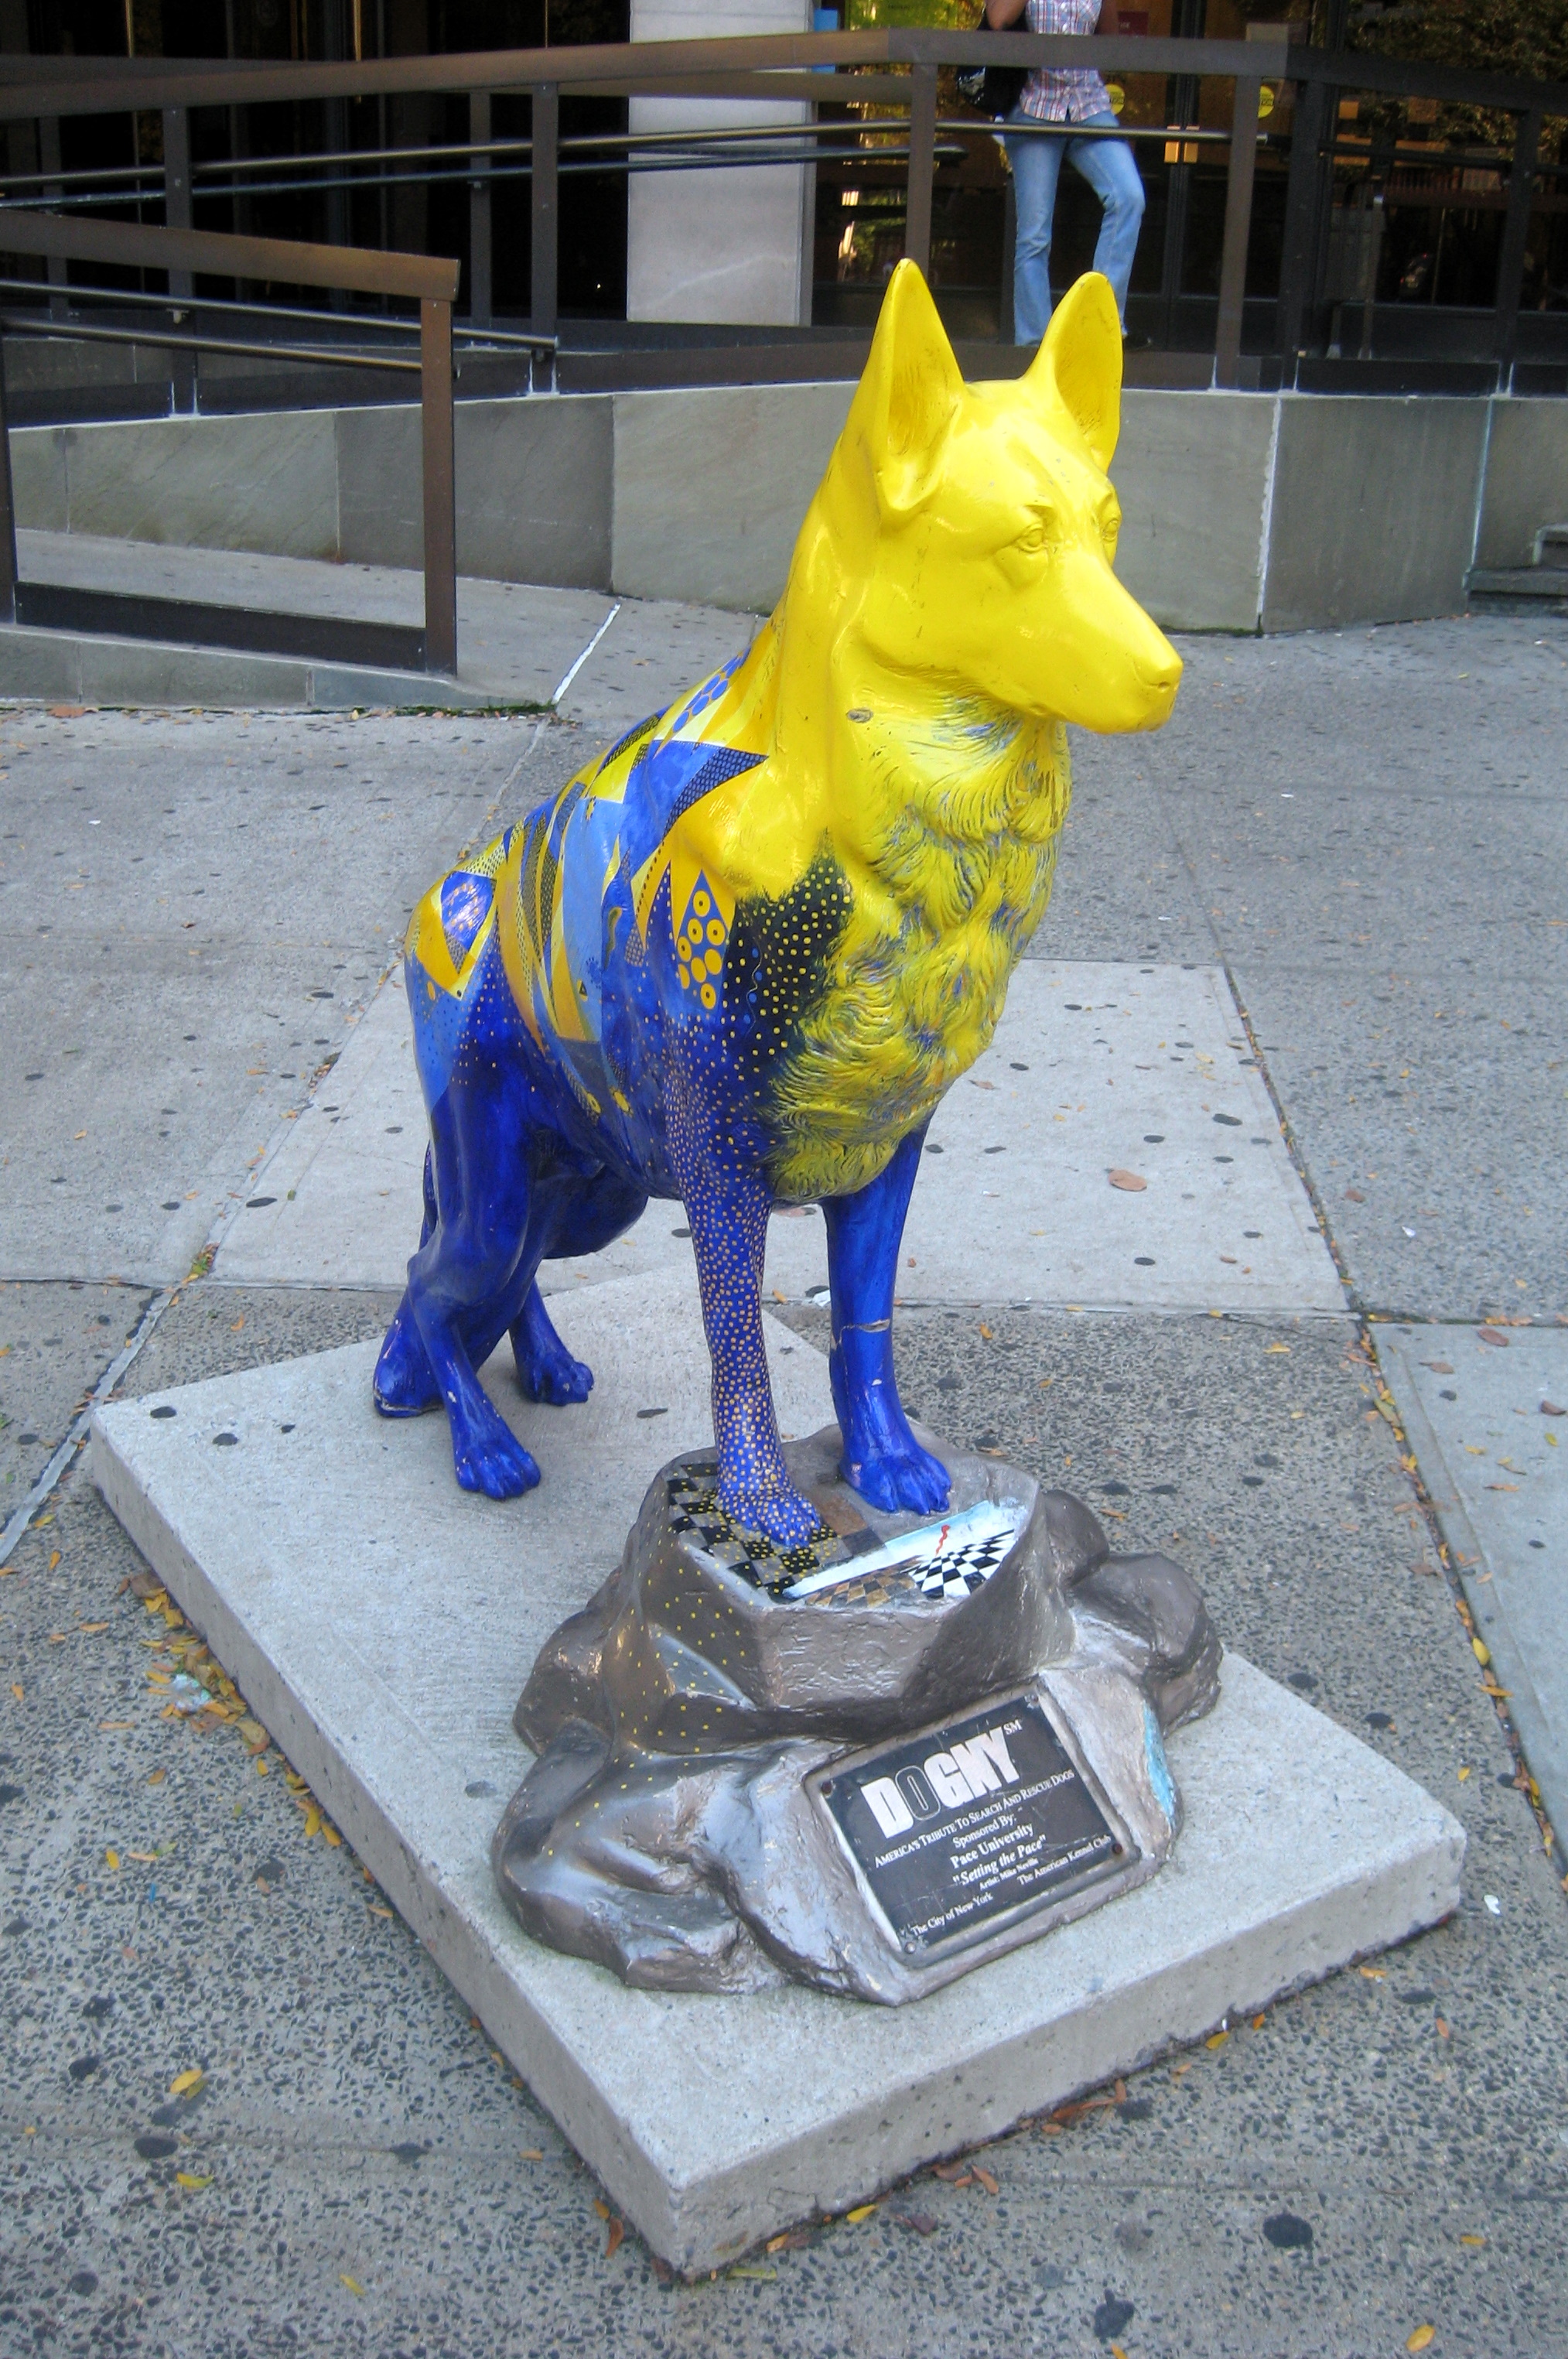 NYC - Pace University - DOGNY - Setting the Pace Setting the Pace by artist Mike Neville, is on permanent display in front of One Pace Plaza. DOGNY  Americas Tribute to Search and Rescue Dogs is a public art initiative commissioned by the American Kennel Club to honor the search and rescue dogs involved in post-September 11th operations and to raise money to support future endeavors. After the attacks on the World Trade Center, The Pentagon and Shanksville, PA, teams of handlers and dogs rushed in to assist in locating survivors. The AKC wanted to acknowledge these dogs with a public show of appreciation and a national effort to support their future missions. For this reason, AKC President and CEO Dennis B. Sprung created DOGNY. On the first anniversary of September 11, AKC and its affiliates, companies in the pet products industry, and many other organizations worked together to display over 100 uniquely painted sculptures of a Search and Rescue Dog throughout the five boroughs of New York City. In Thanksgiving of 2002, the DOGNY sculptures were brought to Sothebys for a charity auction. One hundred percent of funds raised by AKC for DOGNY (including donations, sponsorships, and auction sales) have been allocated in the 501(c)(3) AKC CAR Canine Support and Relief Fund for volunteer and professional canine search and rescue organizations throughout the country. To date, AKC has raised over $3 million for this cause.